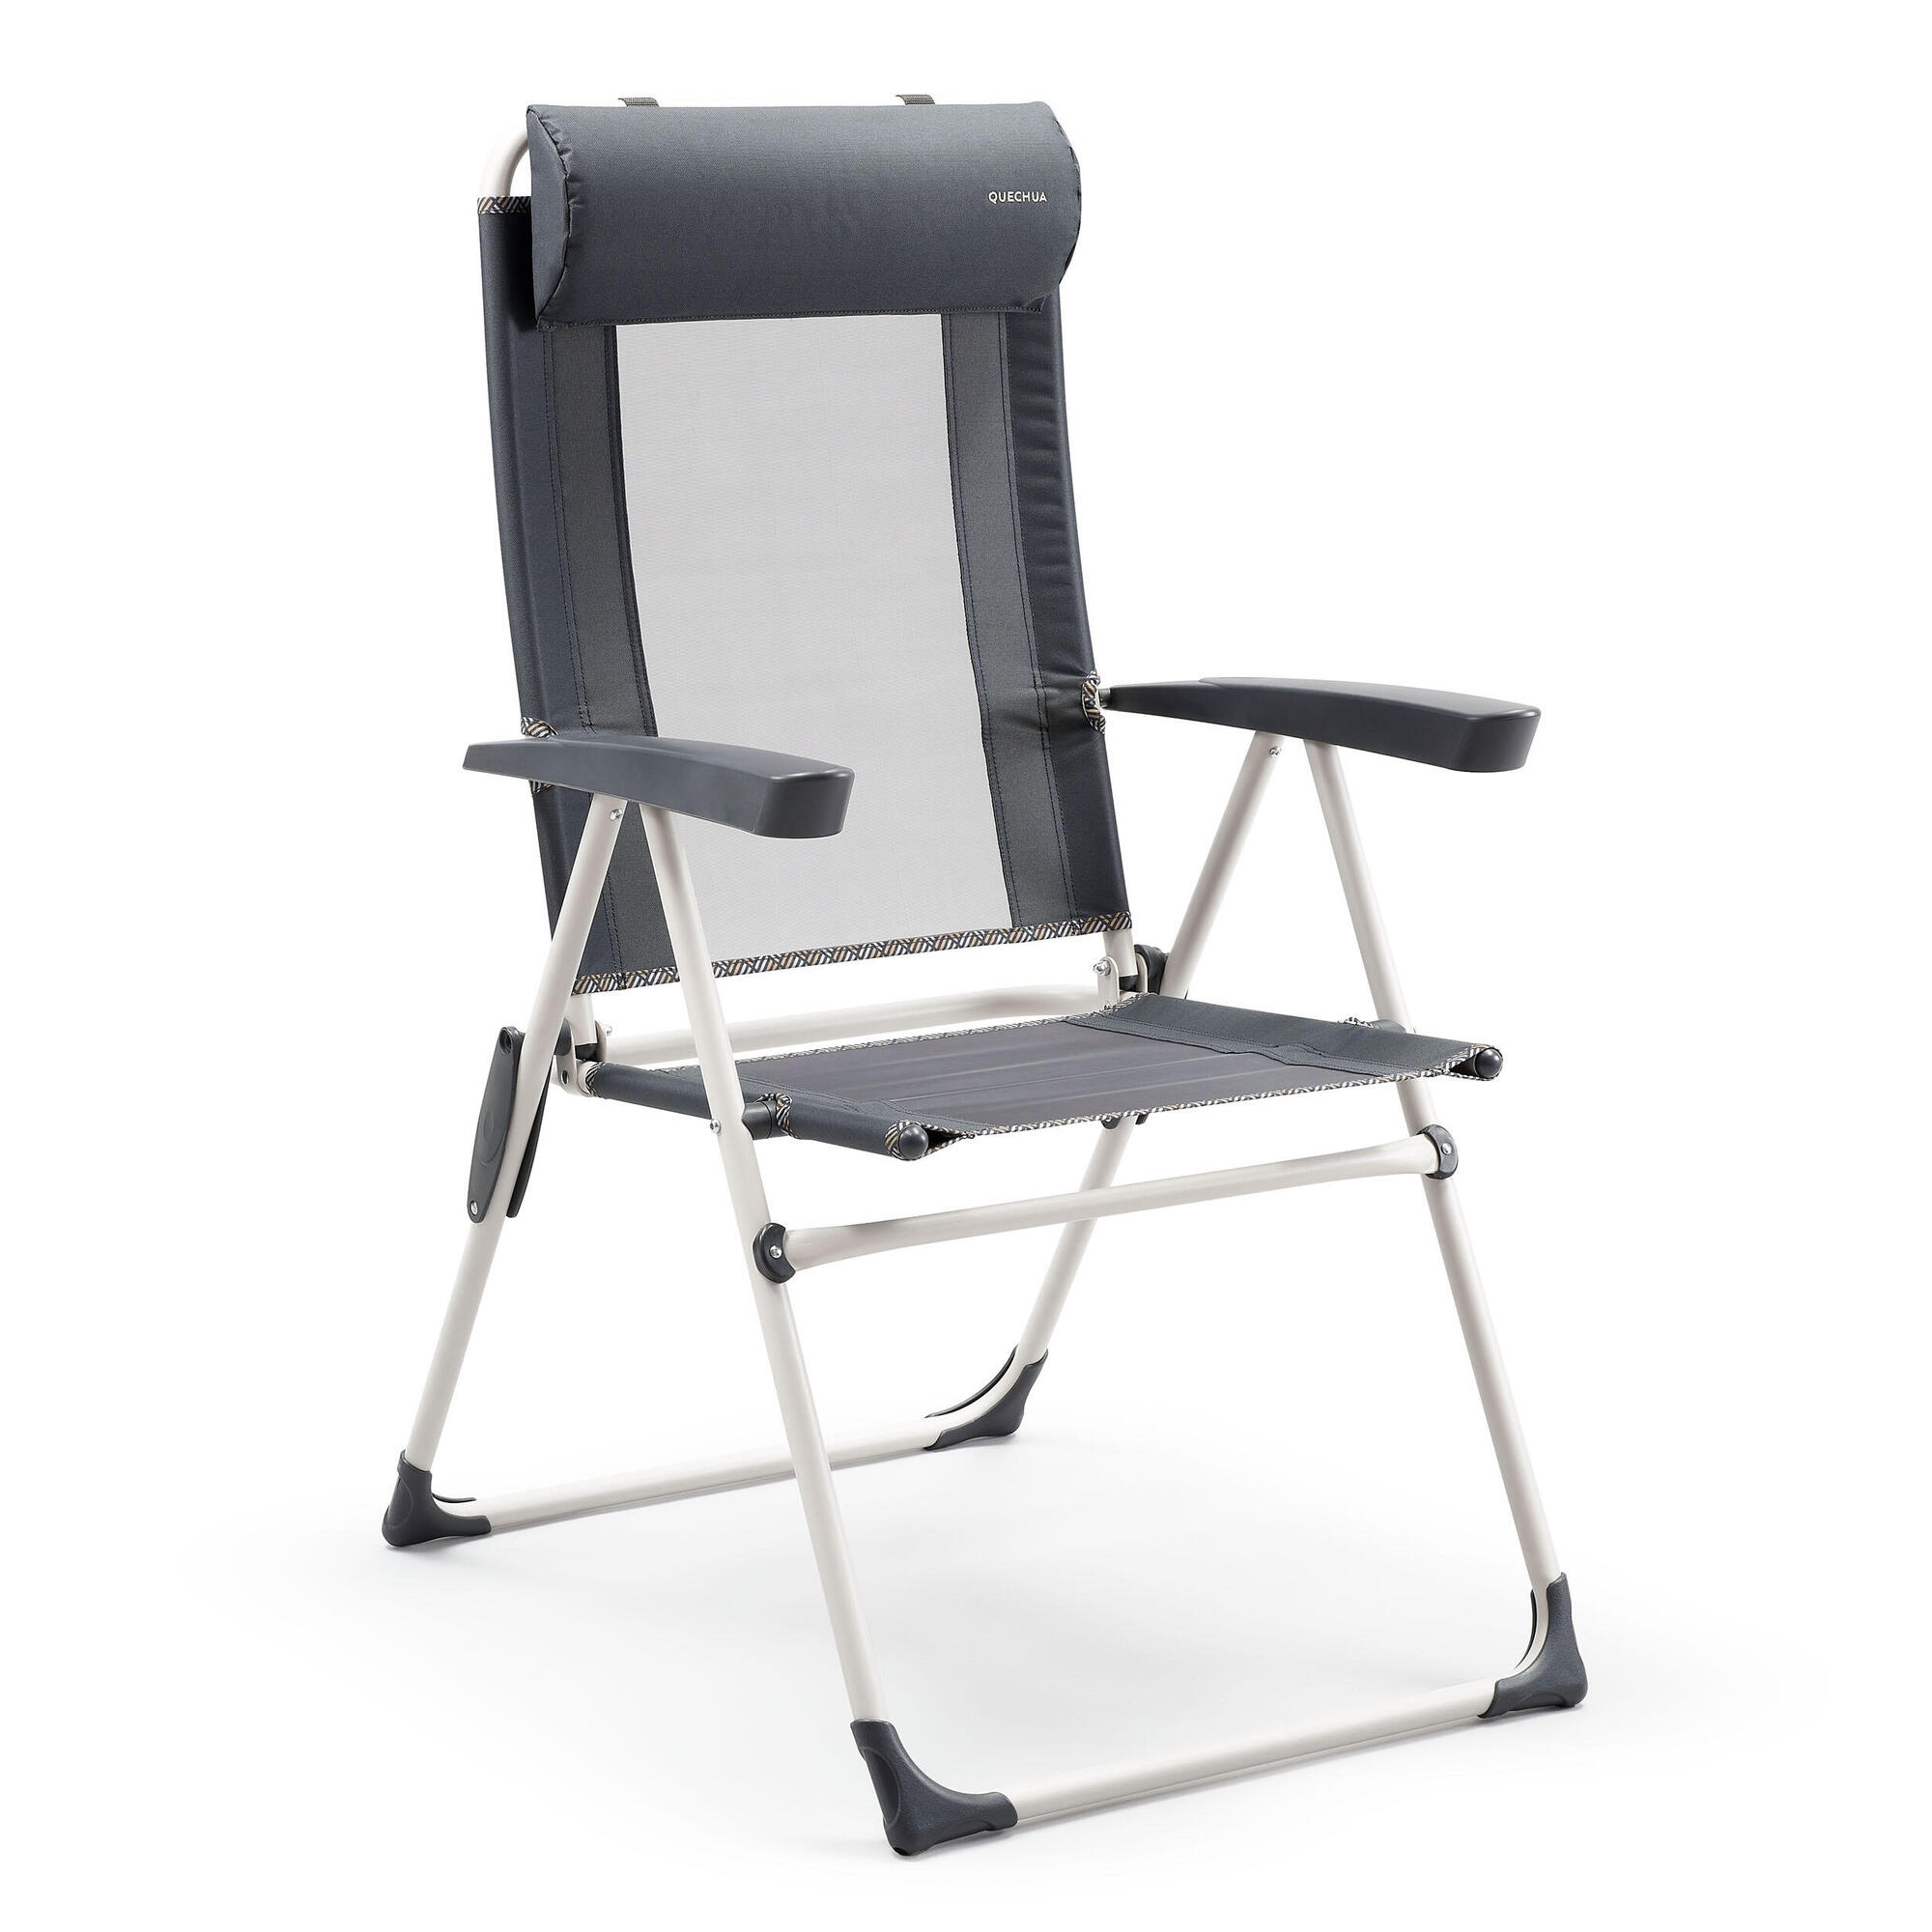 Curble Comfy Support Chair - Good Posture comfortable seat - Decathlon